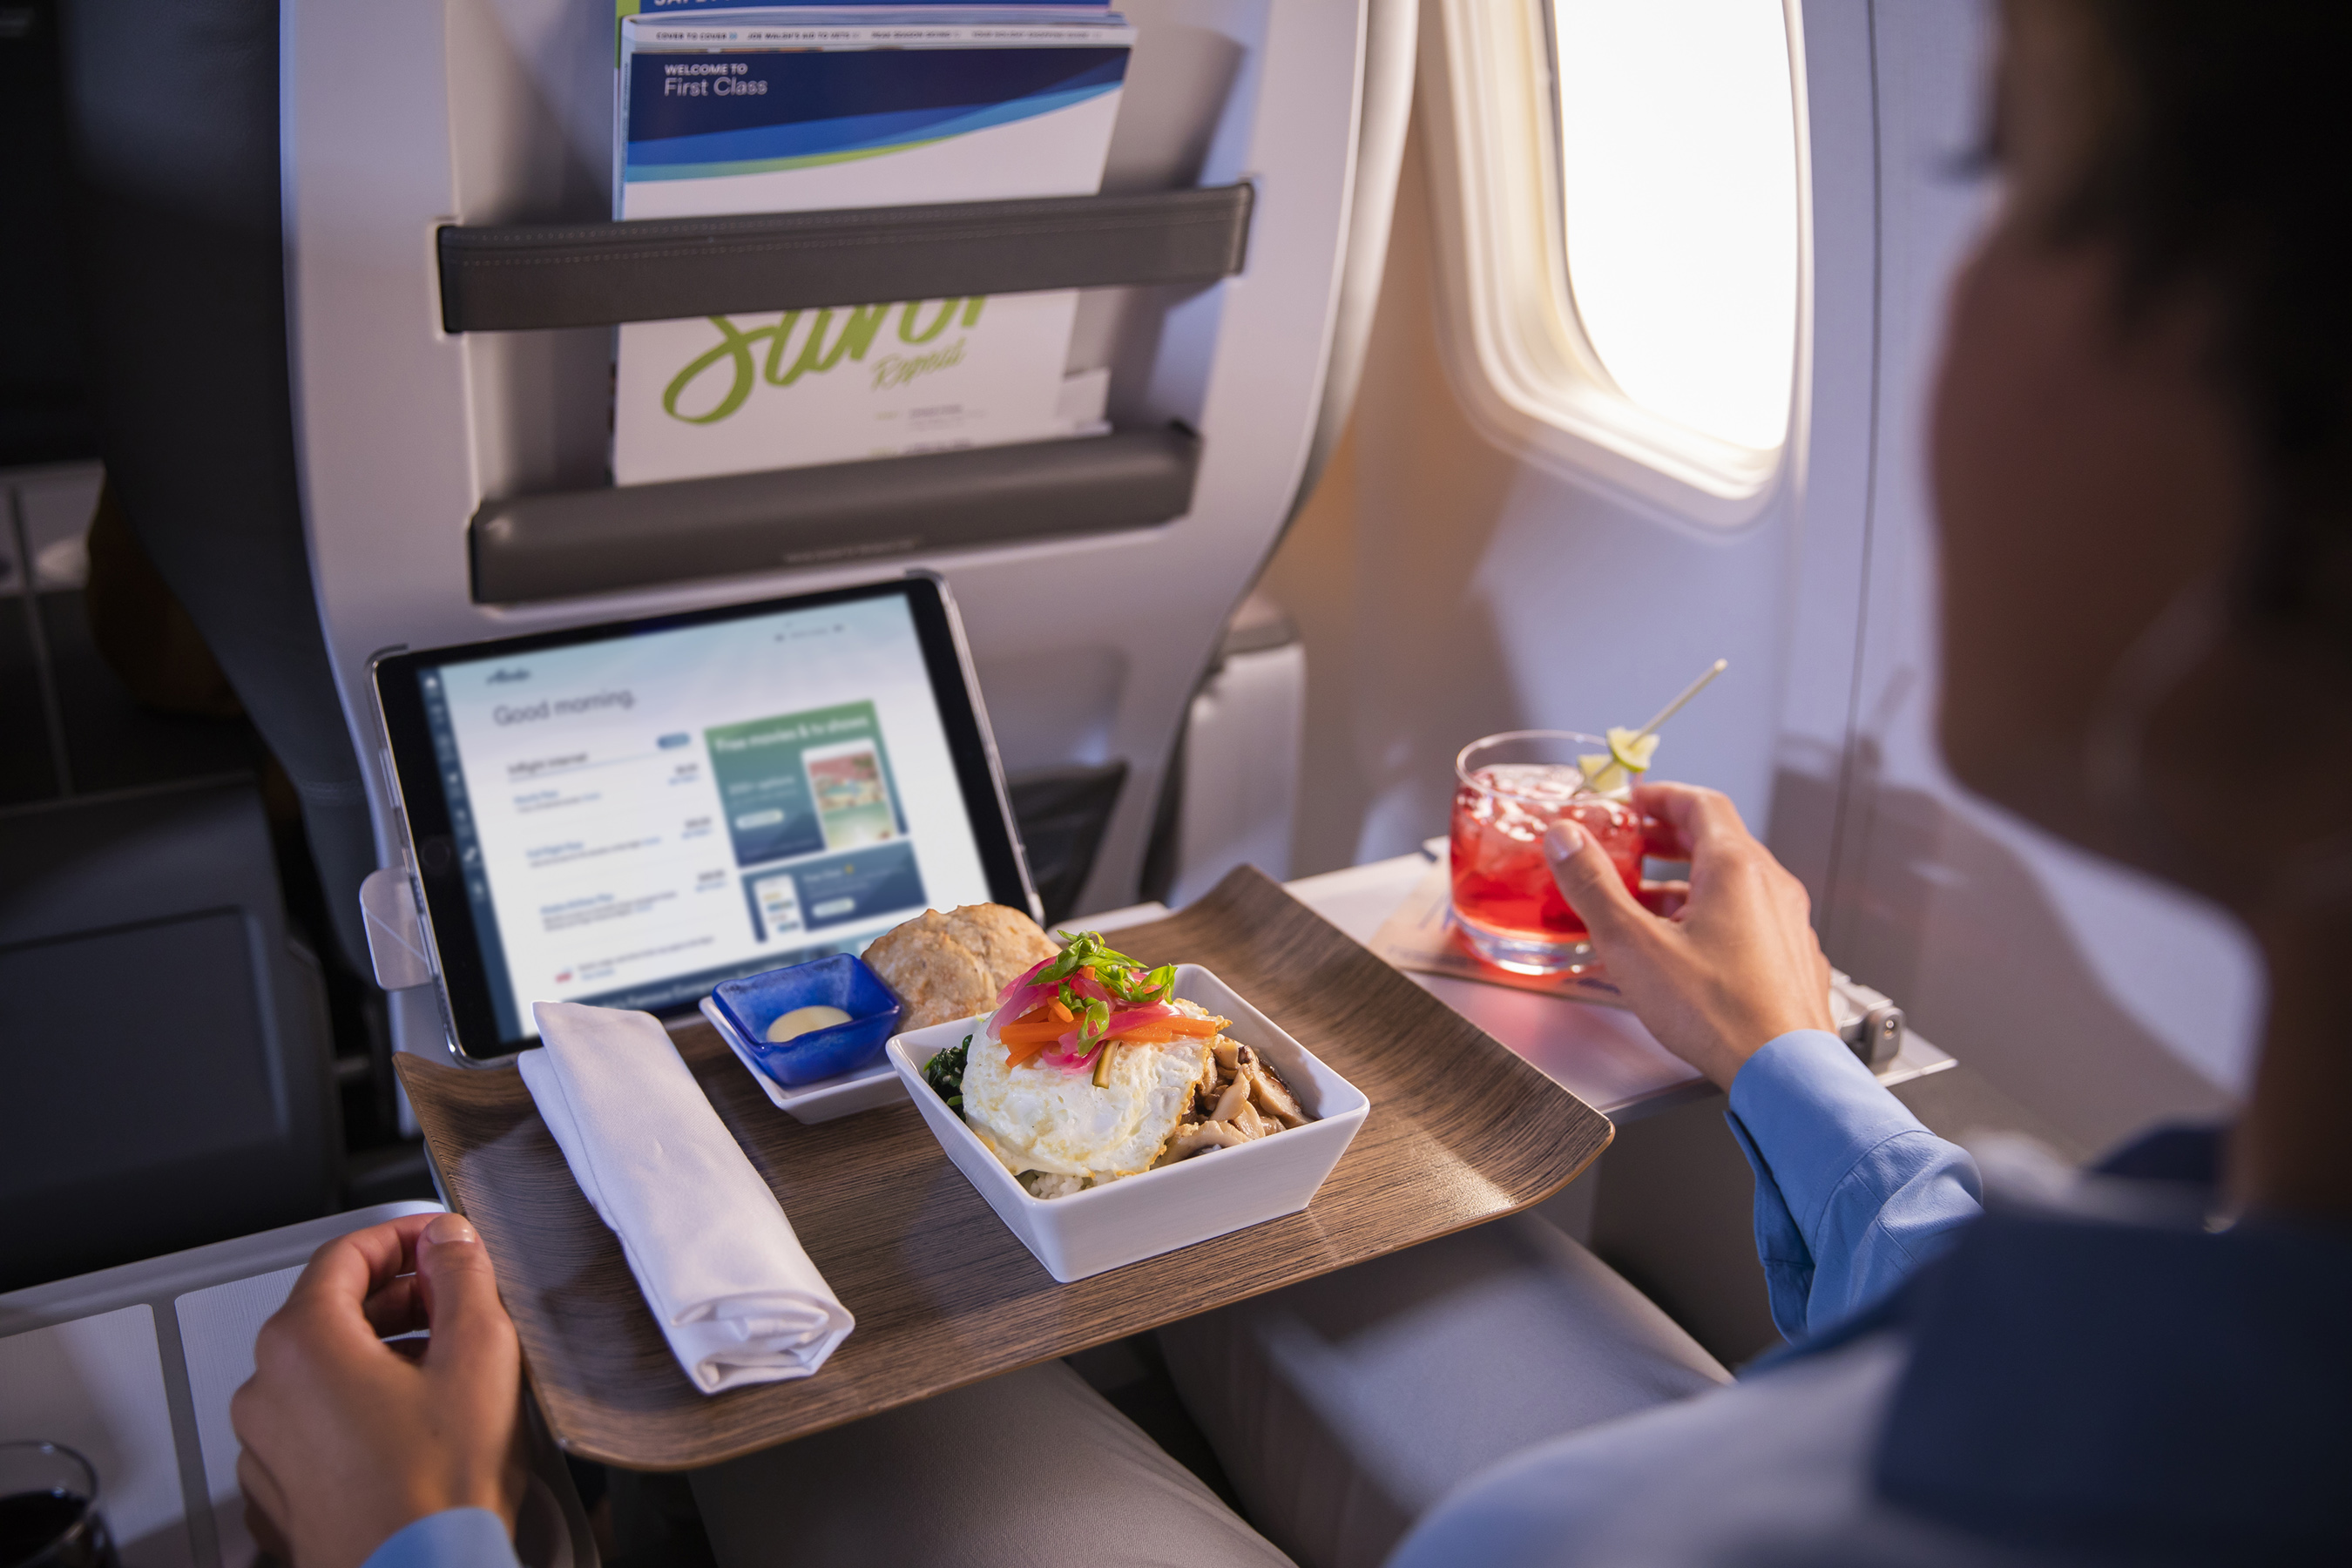 Alaska Airlines revamped its food and beverage offerings to elevate the inflight experience; rotating seasonal menus offer guests fresh, locally-sourced ingredients, as well as more feel-good options from beloved West Coast brands like Luke’s Organic.